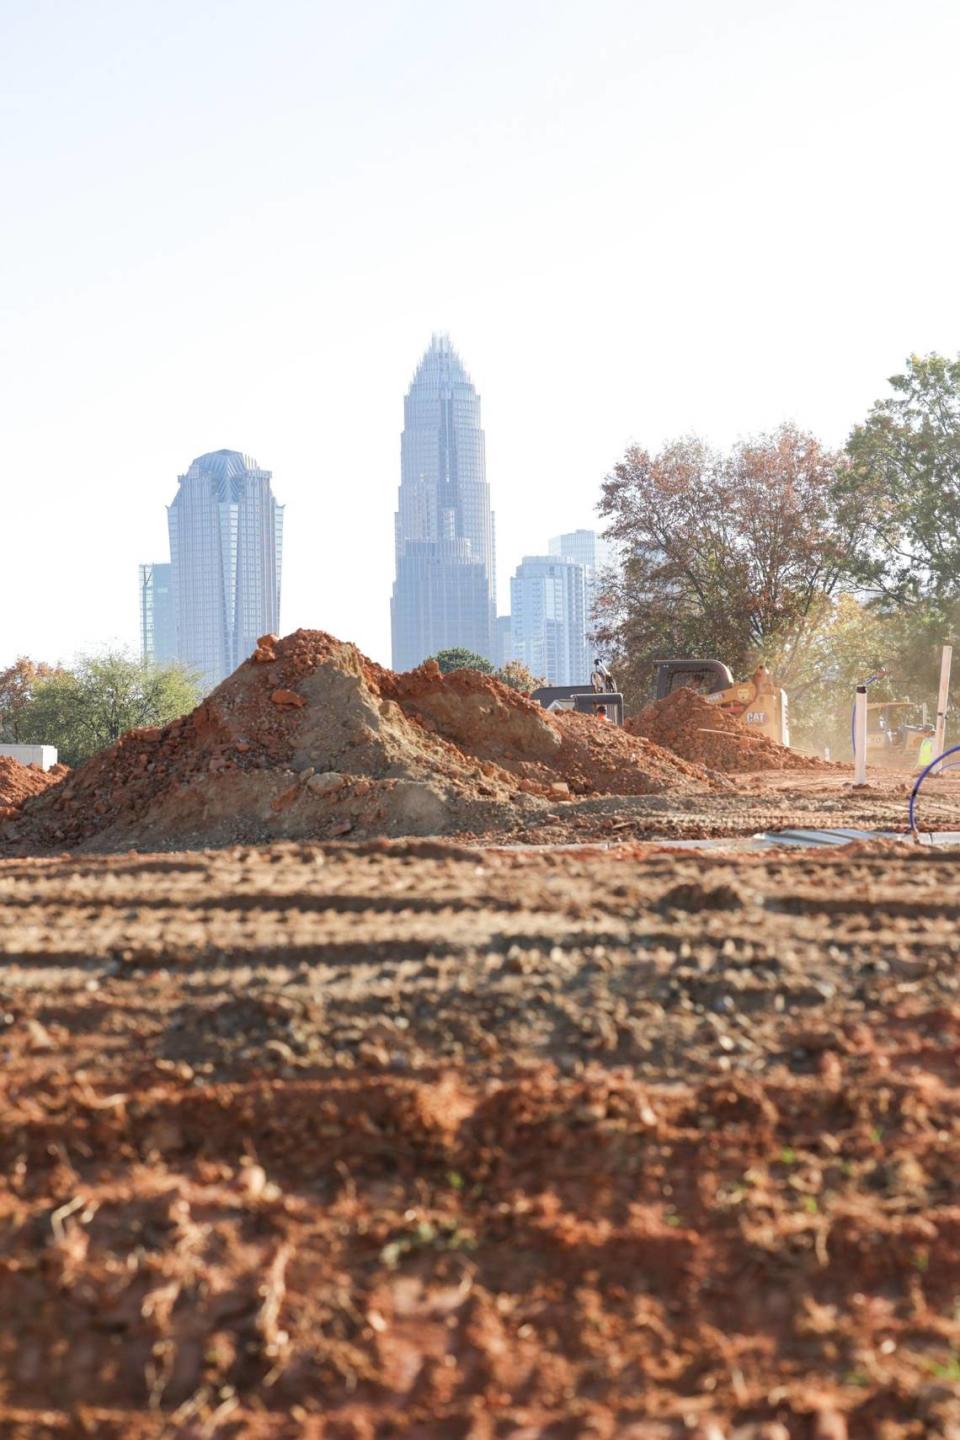 Charlotte lost more than 900 acres of trees from 2018 to 2022, a recent estimate found.